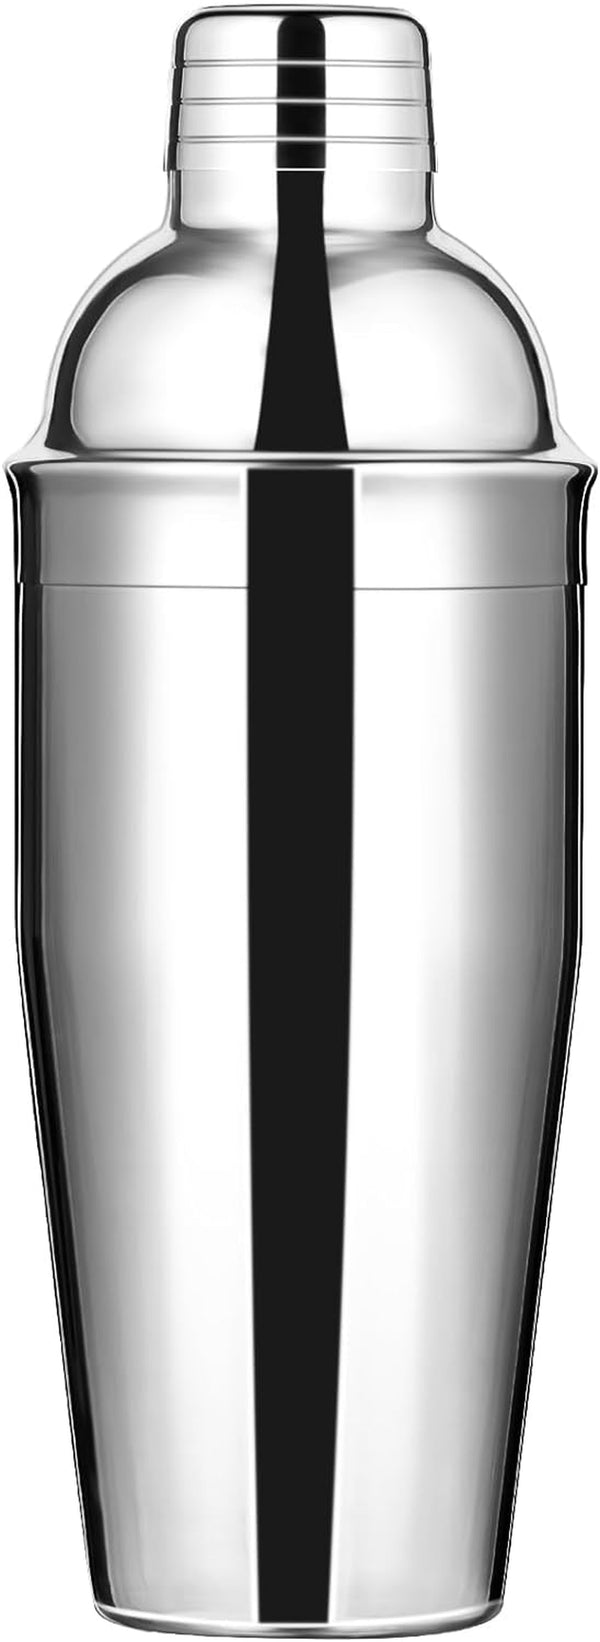 FNT Cocktail Shaker 24oz, Martini Shaker, 18/8 Stainless Steel Drink Shaker with Built-in Strainer, Leak Free and Rust Free, Professional Bar Tools for Bartender